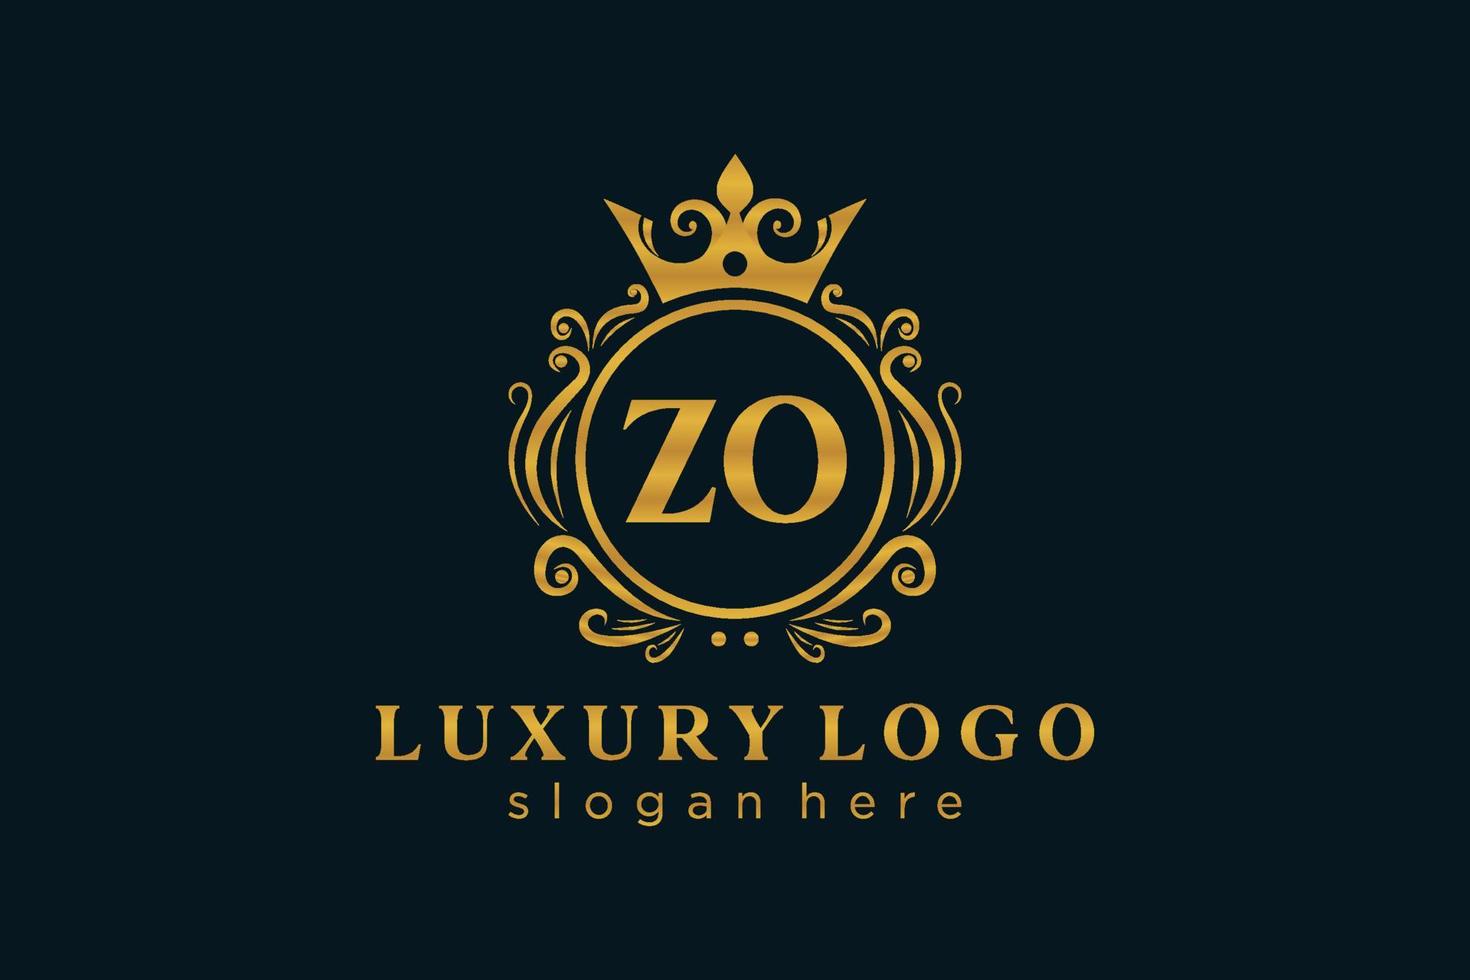 Initial ZO Letter Royal Luxury Logo template in vector art for Restaurant, Royalty, Boutique, Cafe, Hotel, Heraldic, Jewelry, Fashion and other vector illustration.